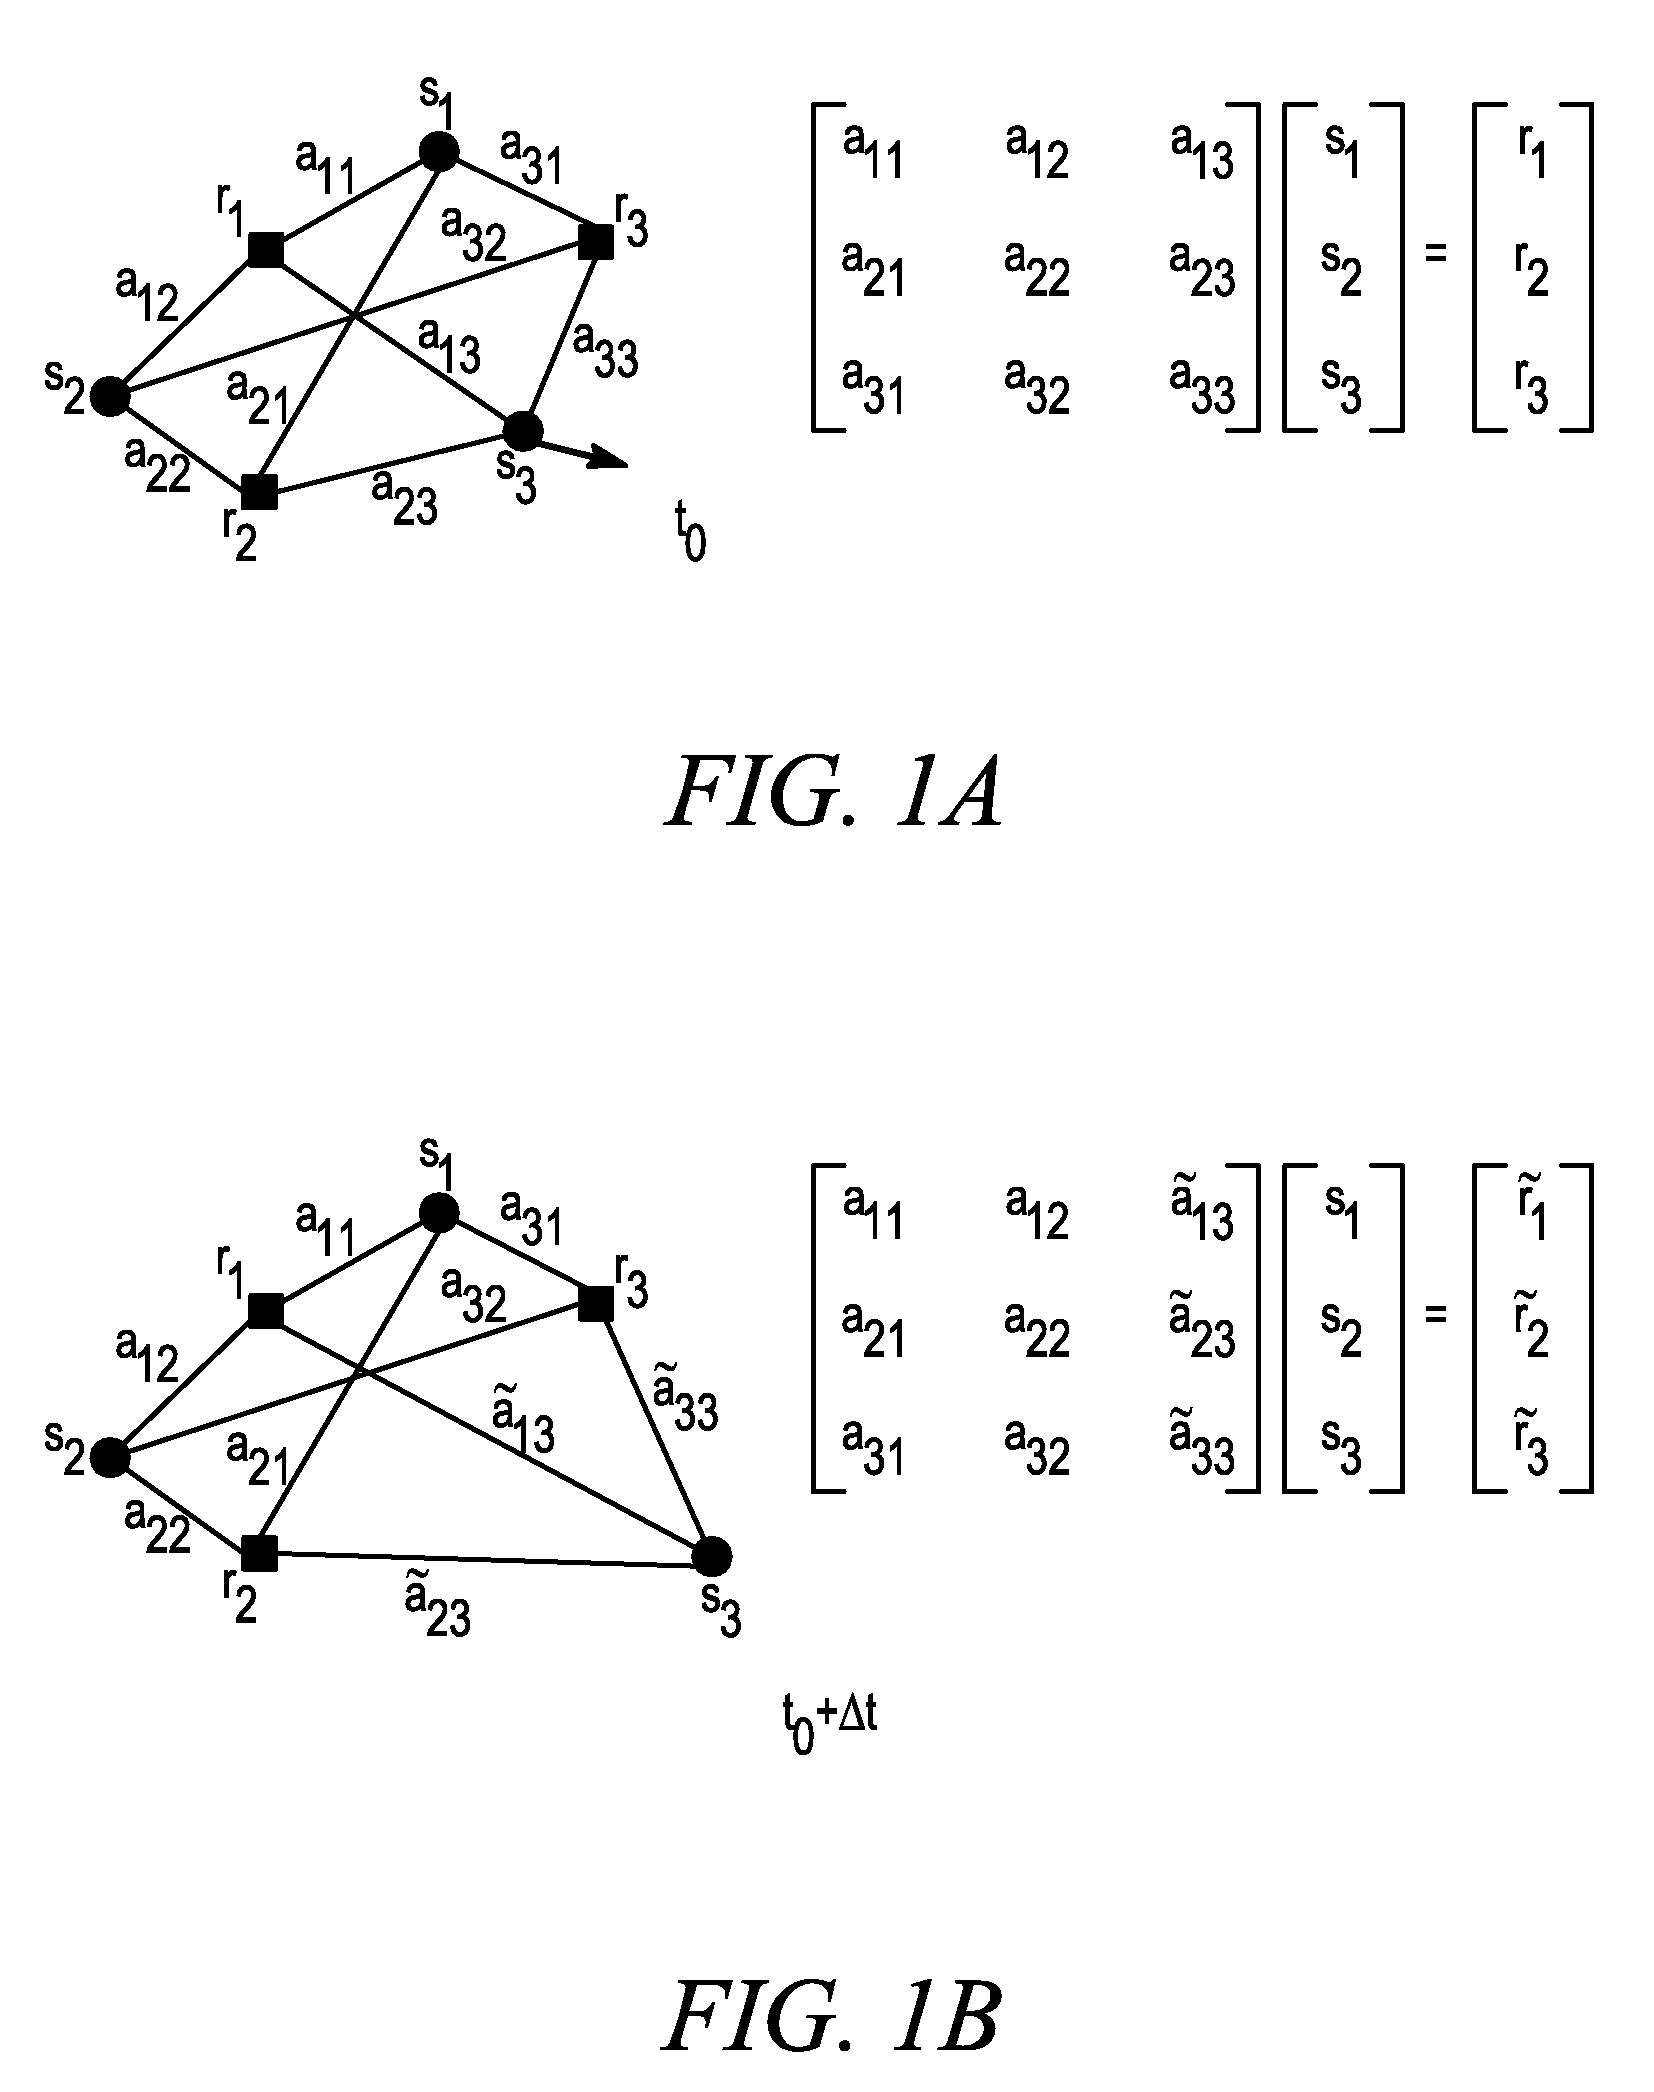 System and method for providing simulated hardware-in-the-loop testing of wireless communications networks